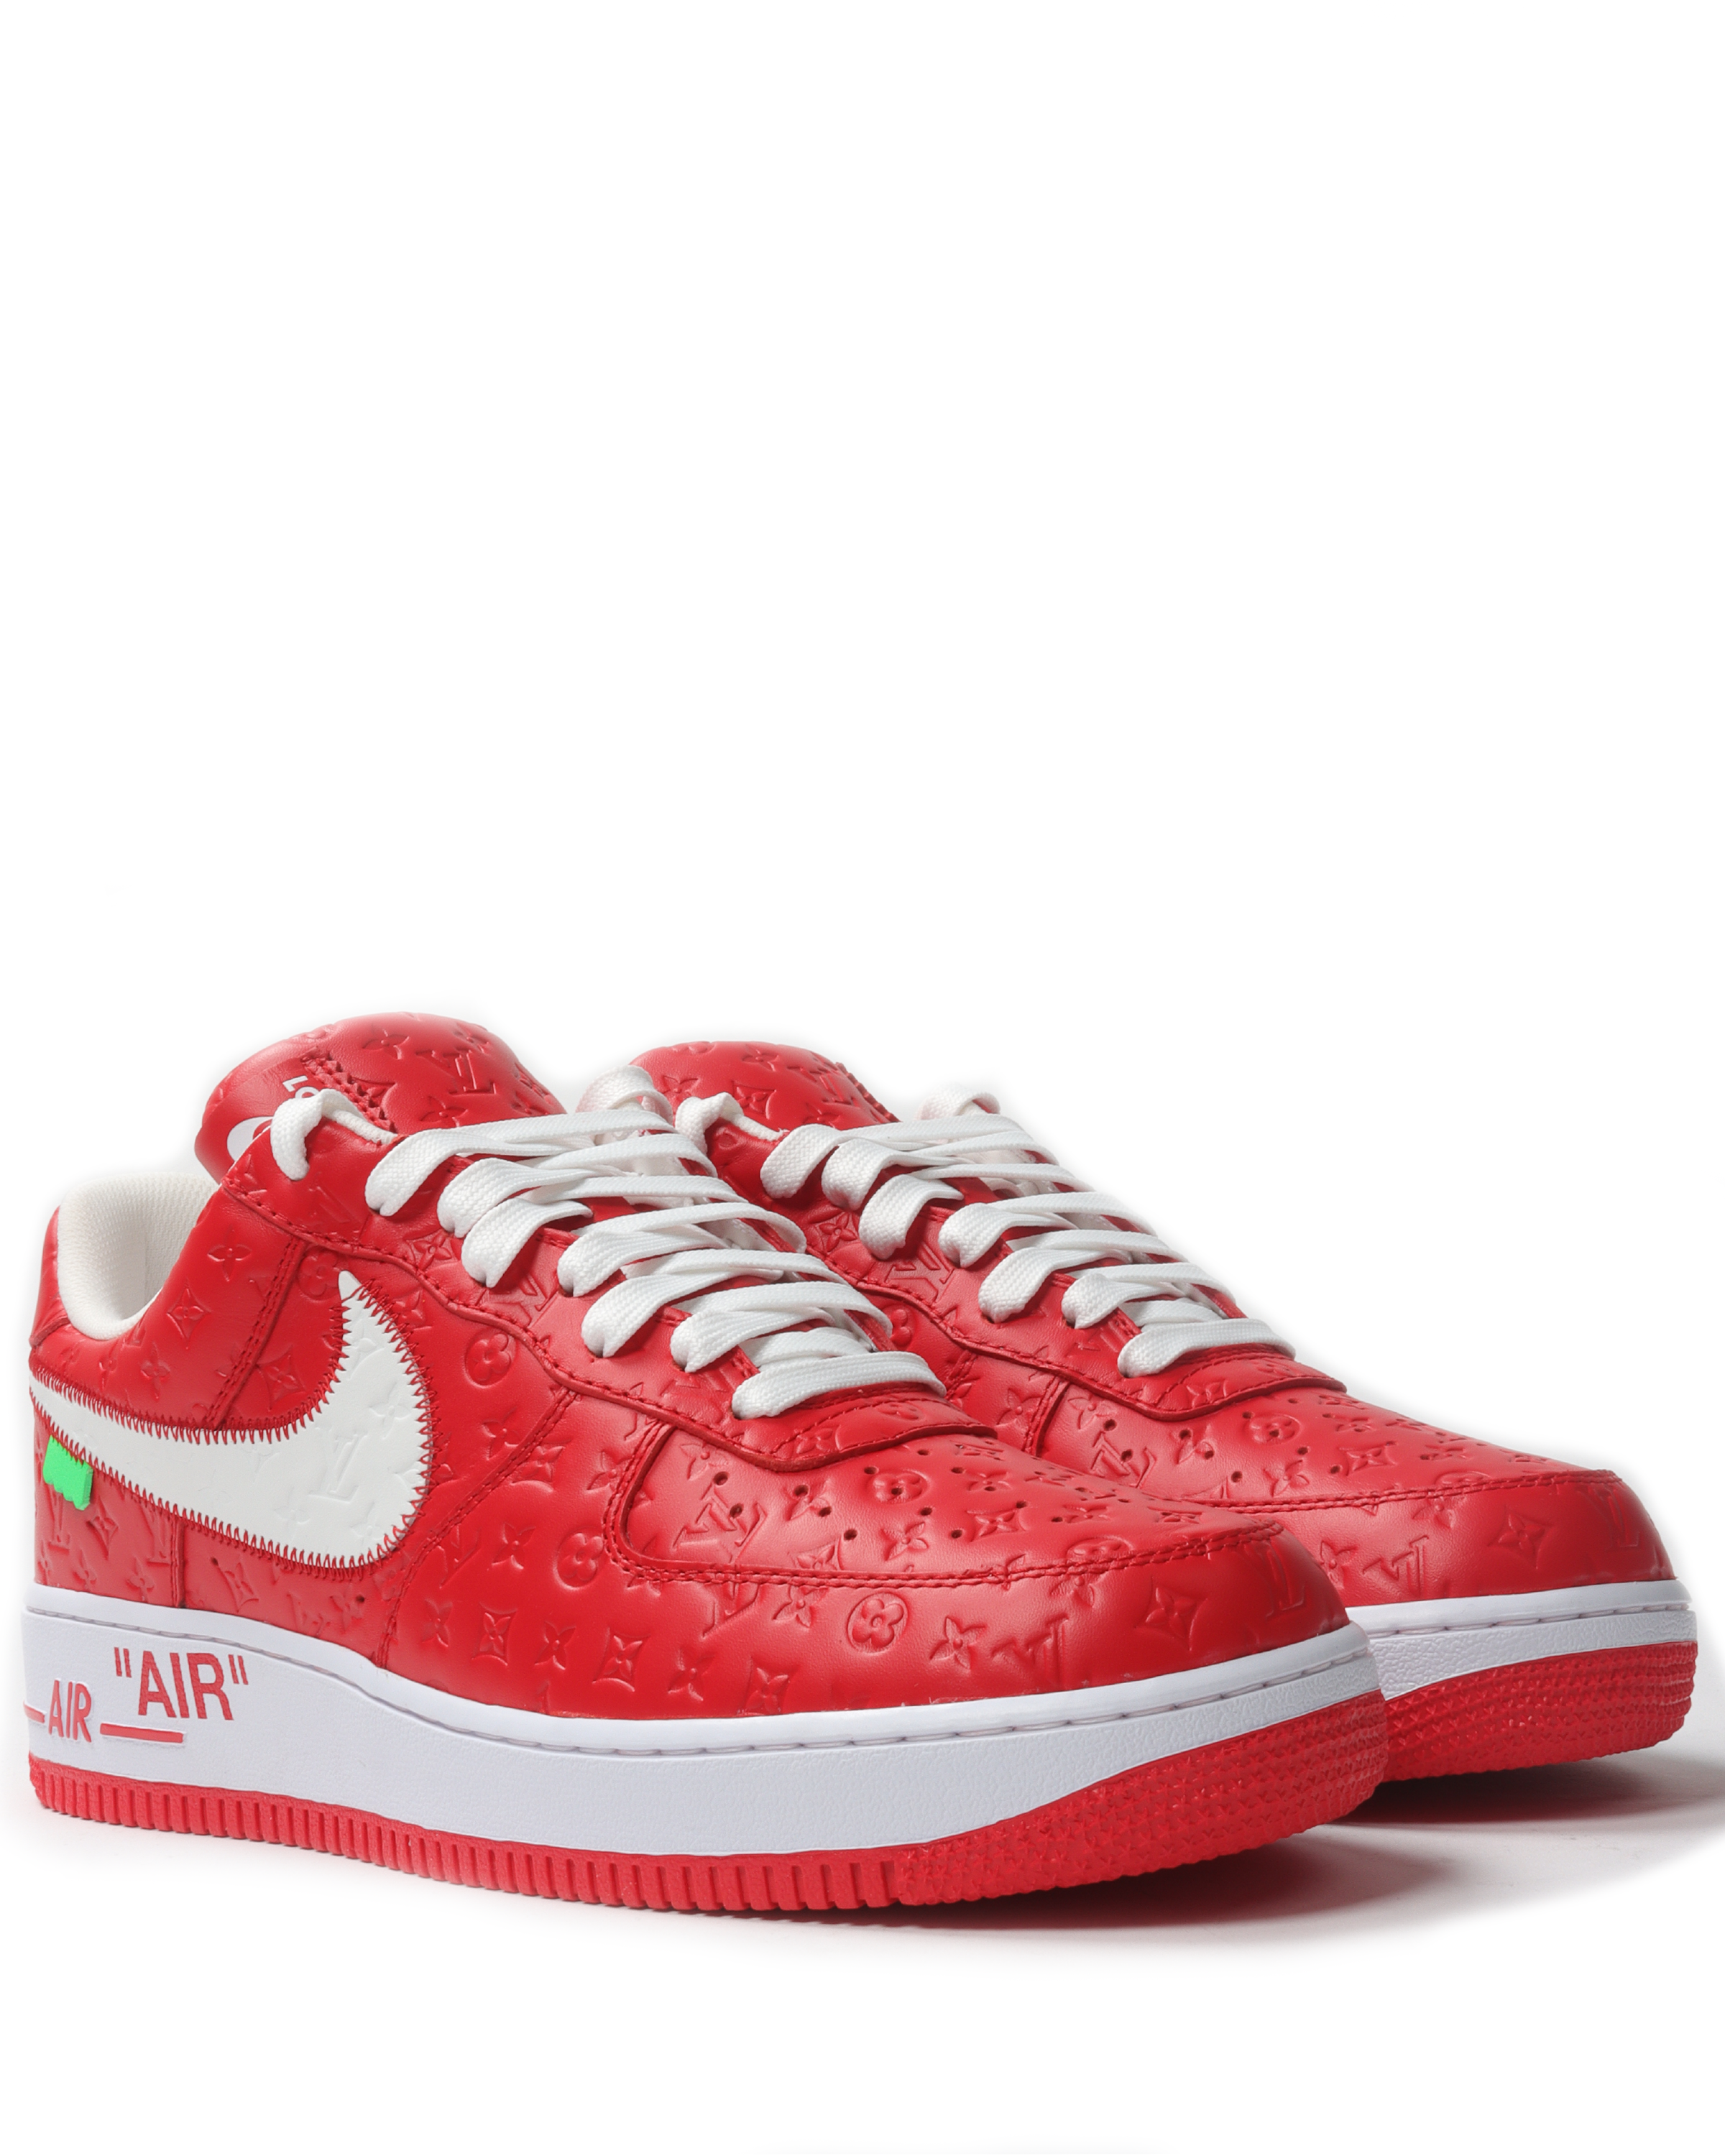 $20,000 Louis Vuitton Nike Air Force 1 Red By Virgil Abloh FIRST